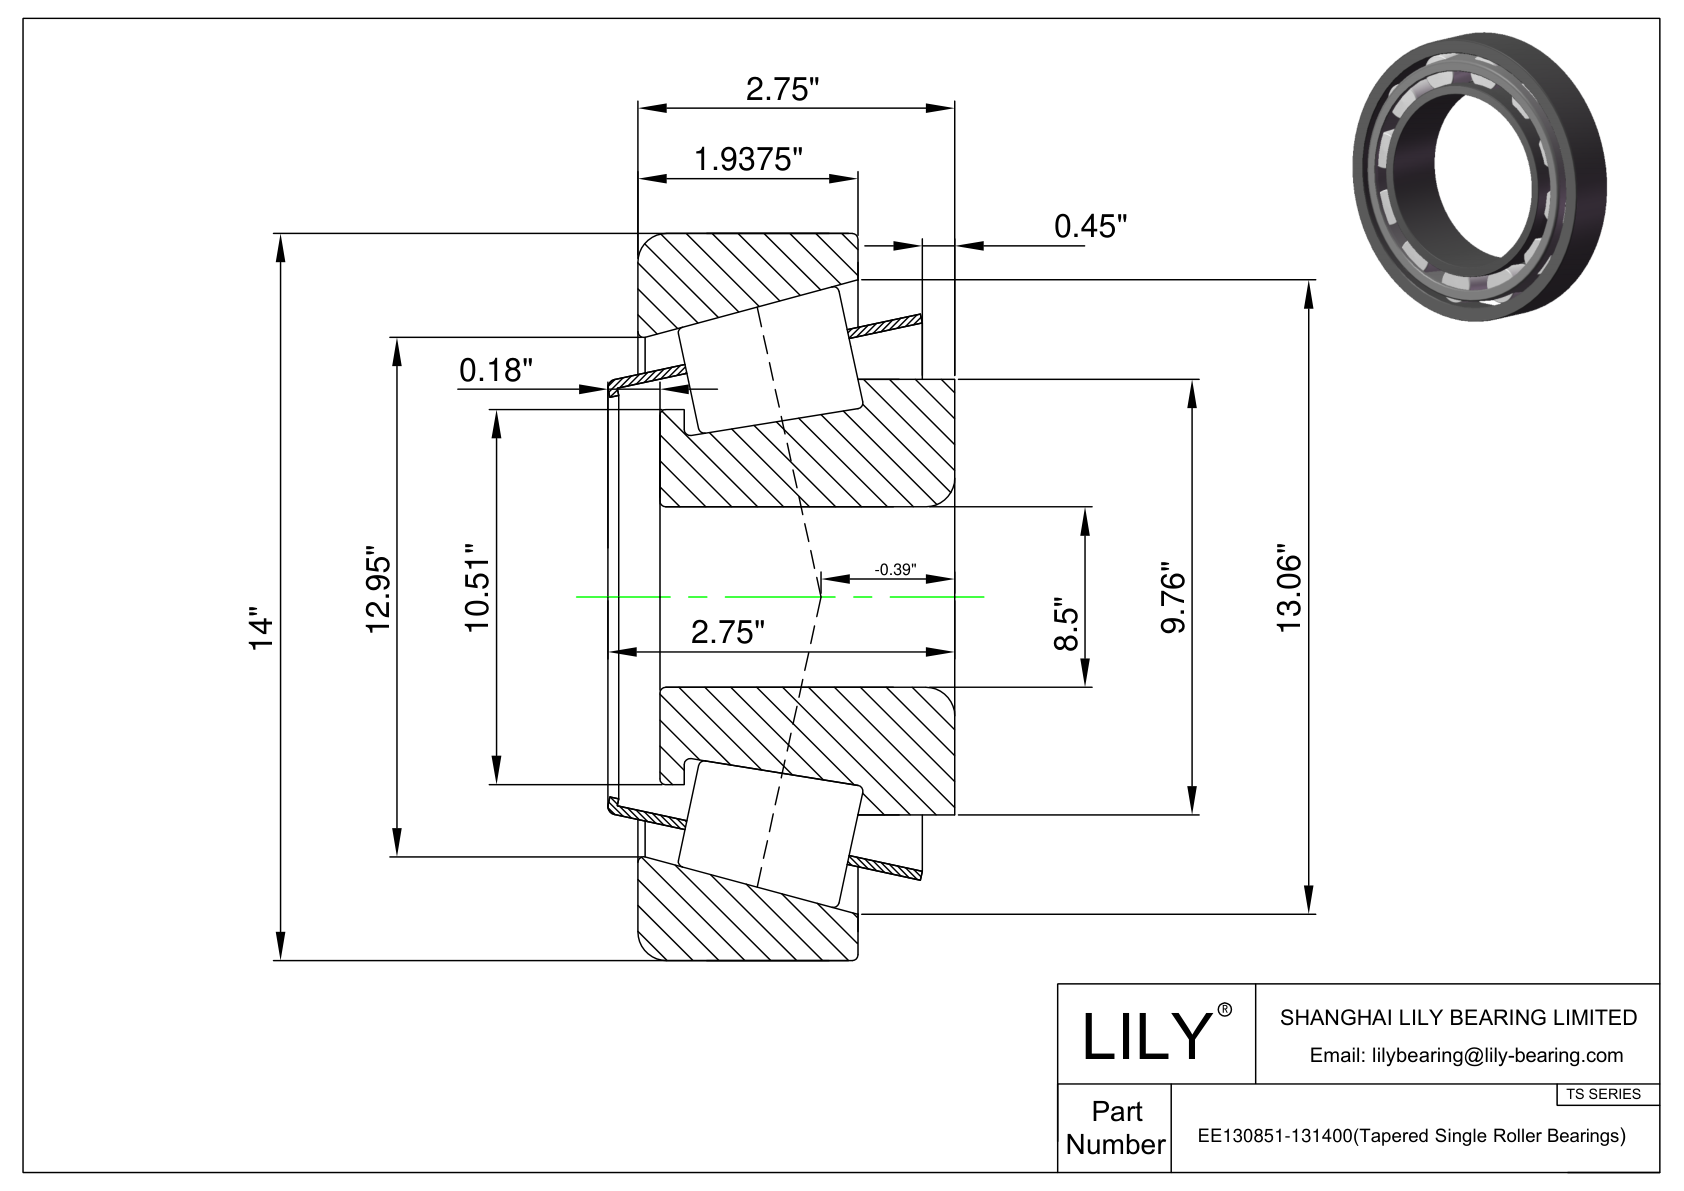 EE130851-131400 TS (Tapered Single Roller Bearings) (Imperial) cad drawing